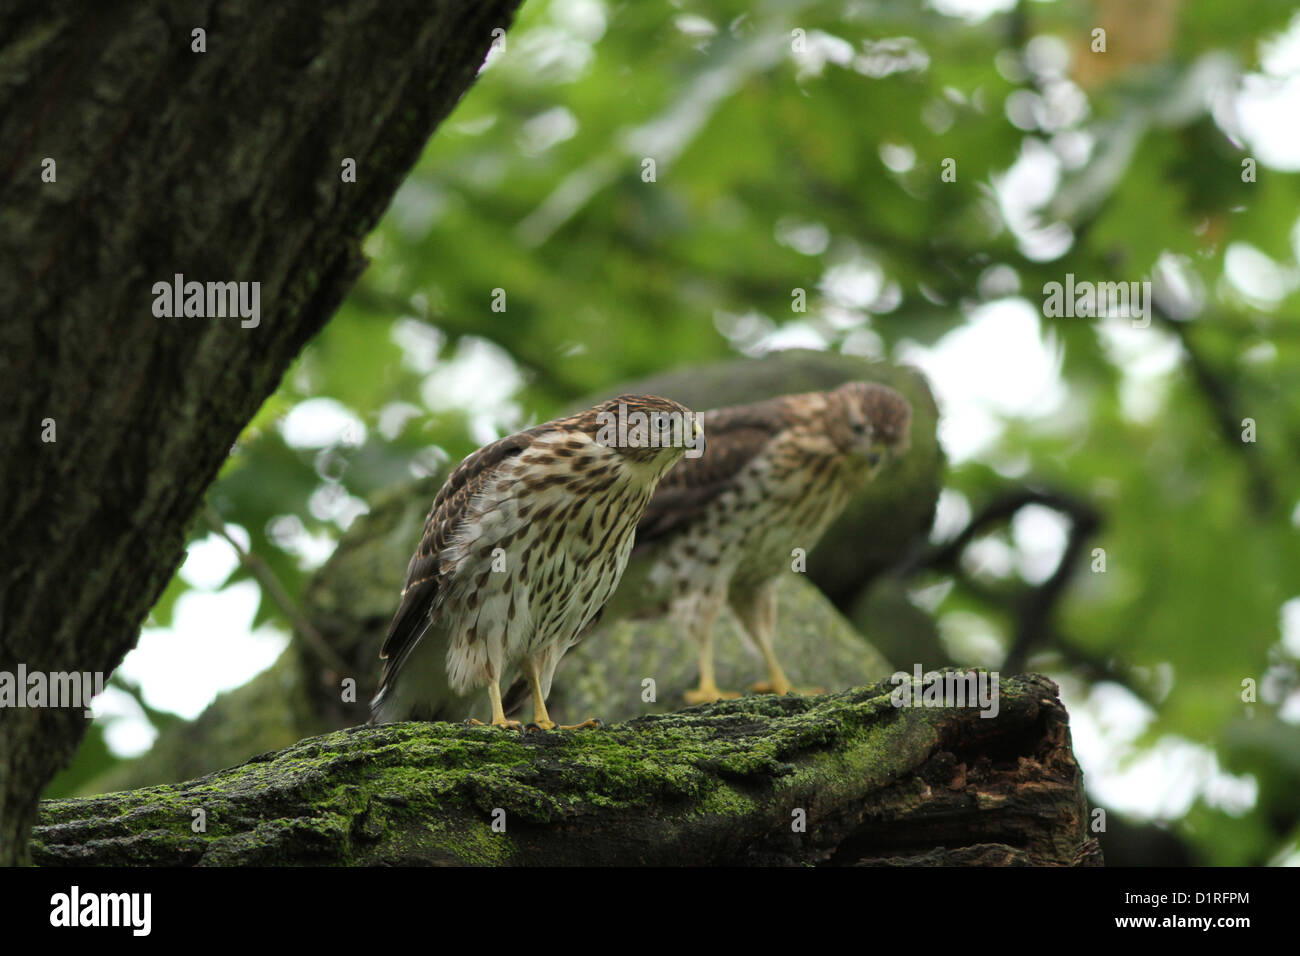 Juveniles Cooper's hawks (Accipiter cooperii) in the forest Stock Photo